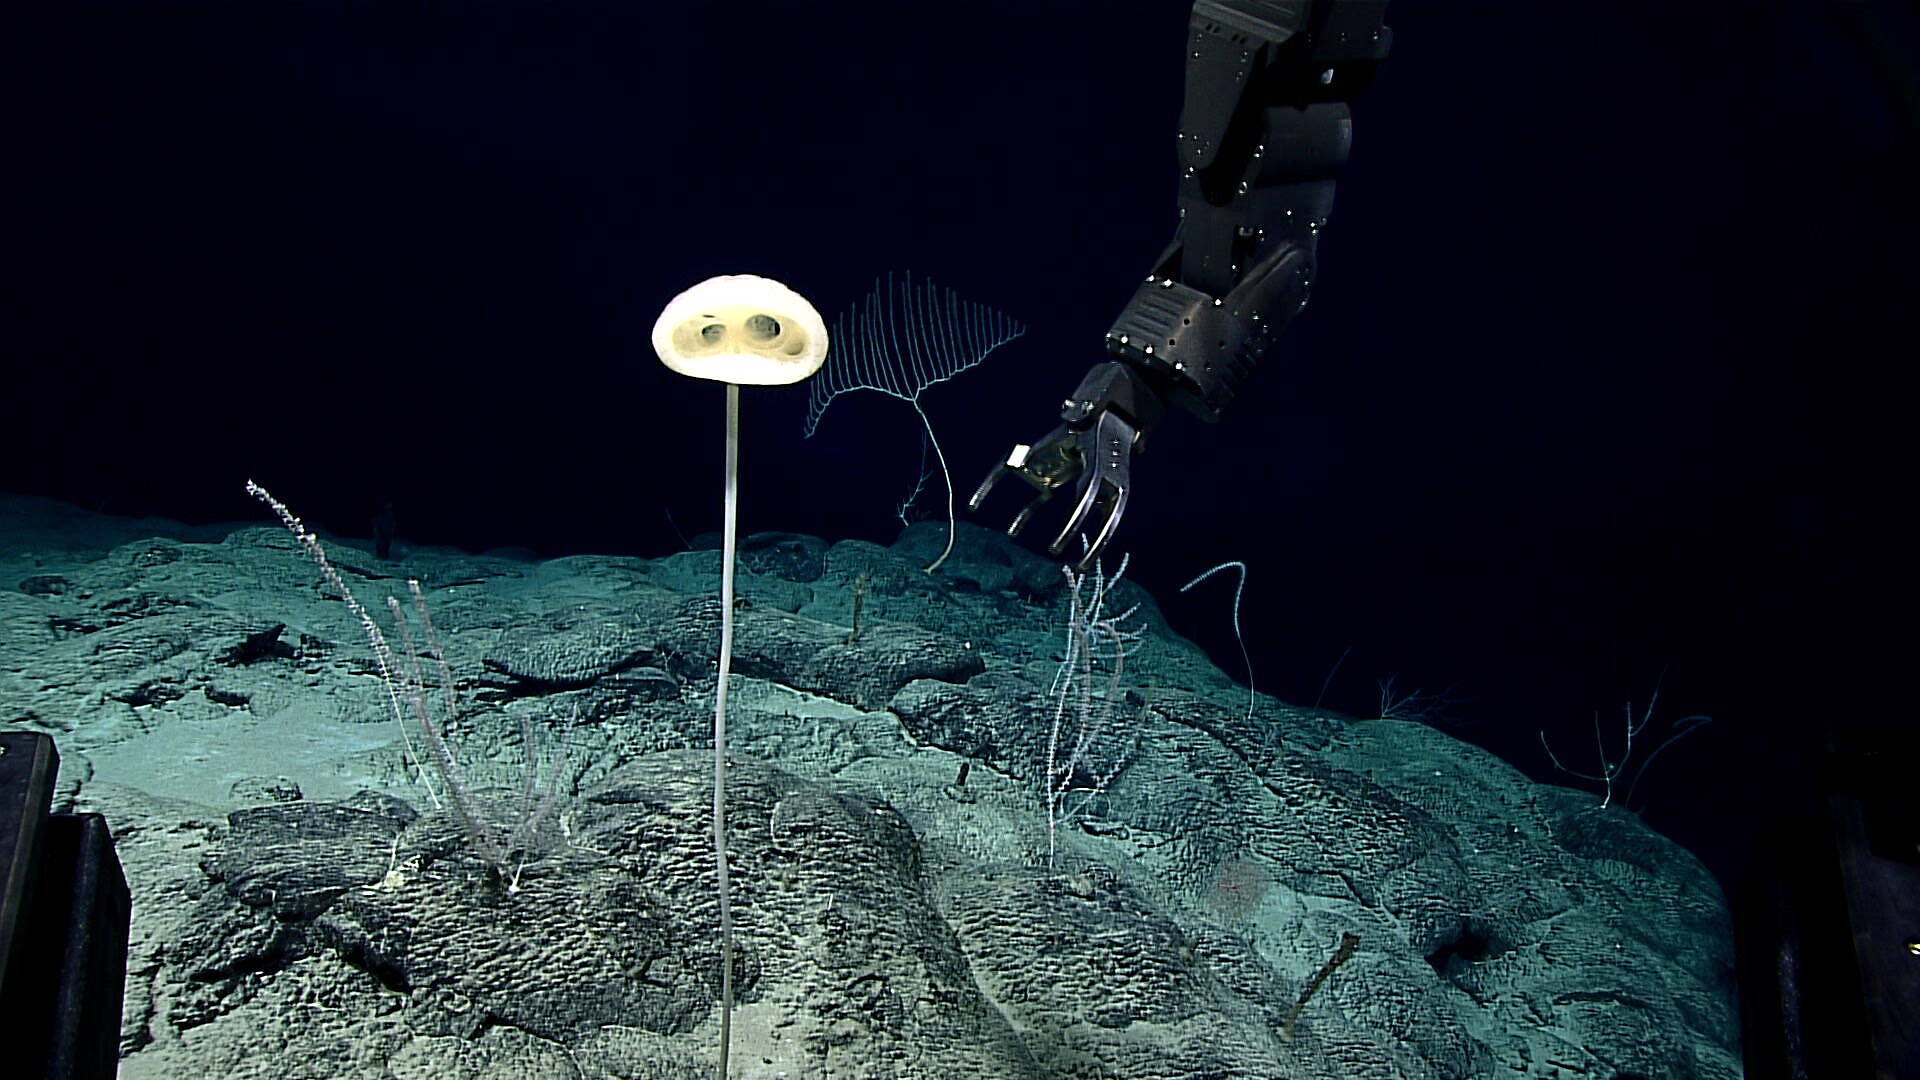 This E.T. sponge was collected in 2016 at a depth of ~2,000 meters (6,560 feet) in the Pacific Ocean. It has since been formally described and given the name Advhena magnifica (“magnificent alien” in Latin).